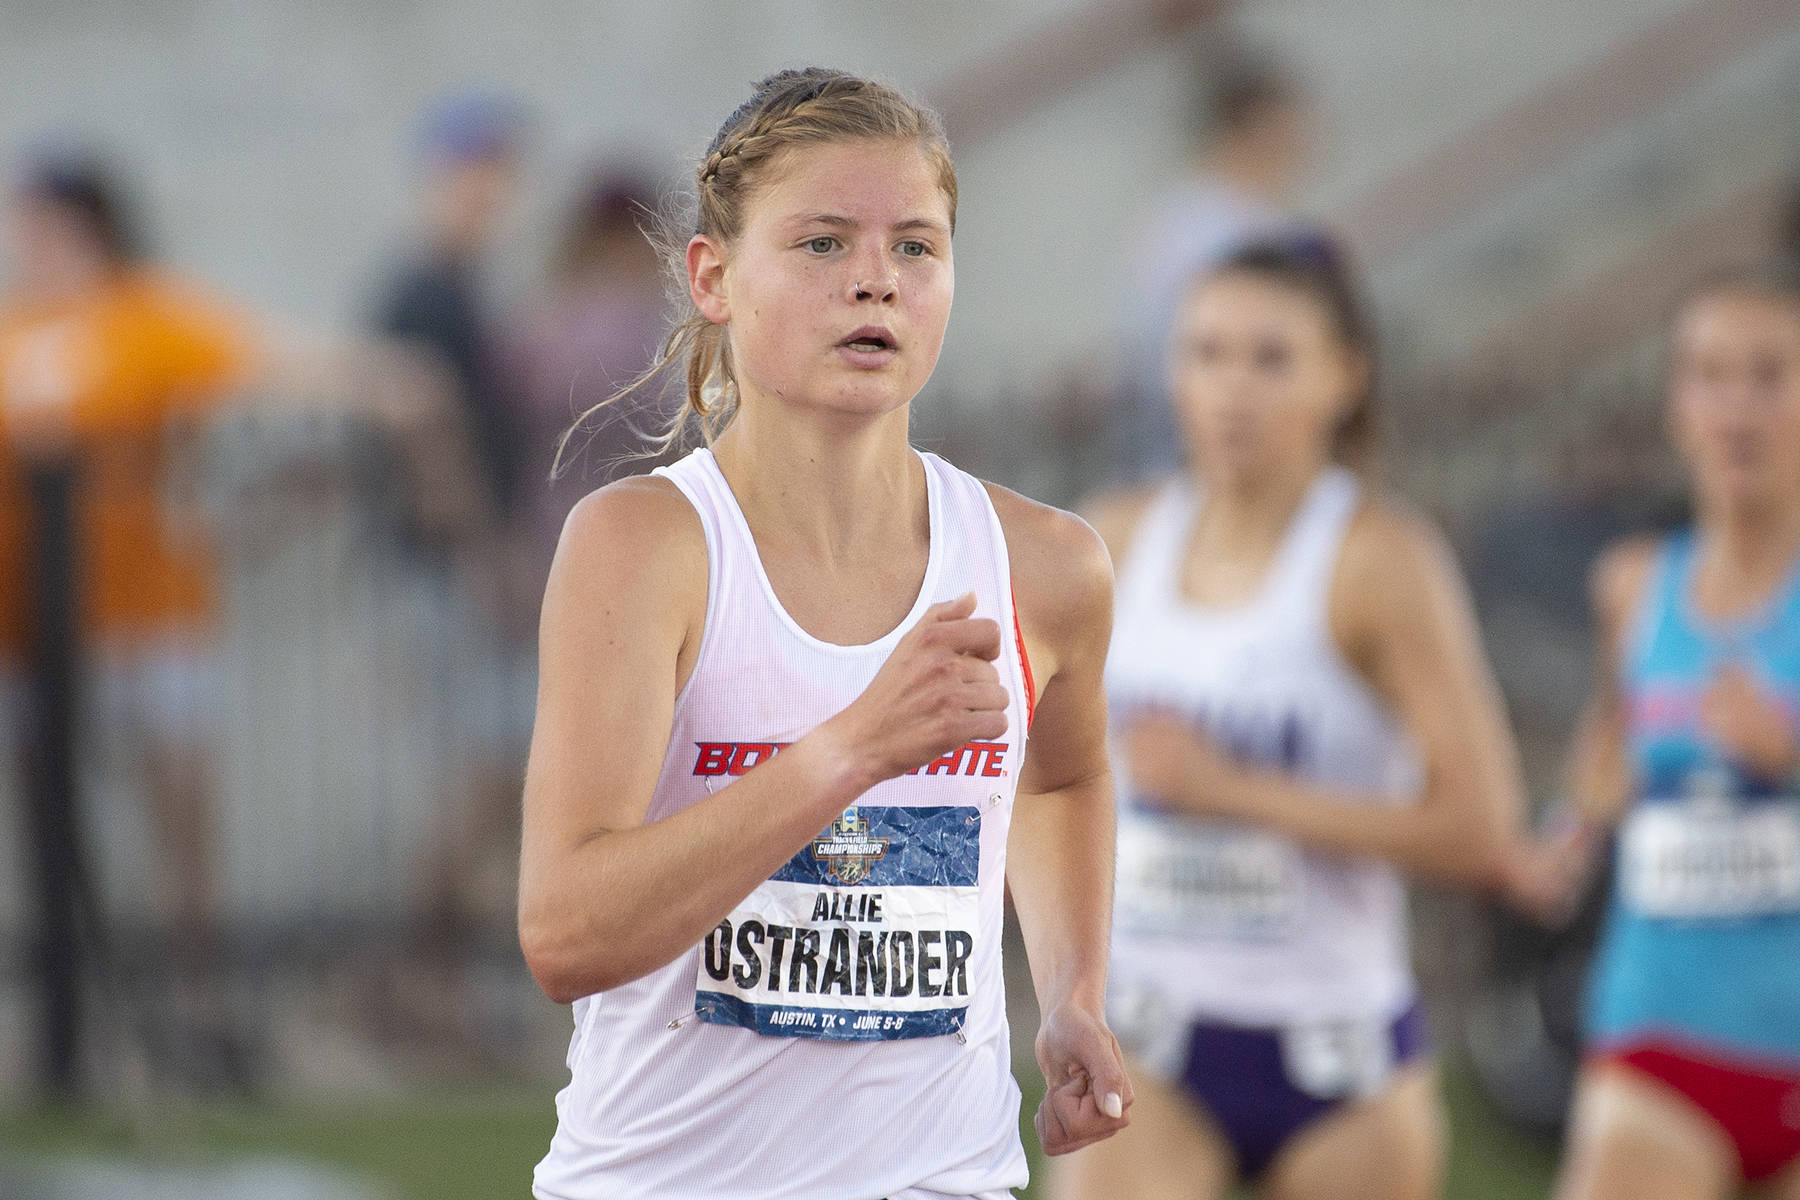 Allie Ostrander competes in a women’s 3,000-meter steeplechase preliminary heat Thursday, June 6, 2019, at the NCAA Div. I Track and Field Championships in Austin, Texas. (Photo provided by Boise State Athletics)